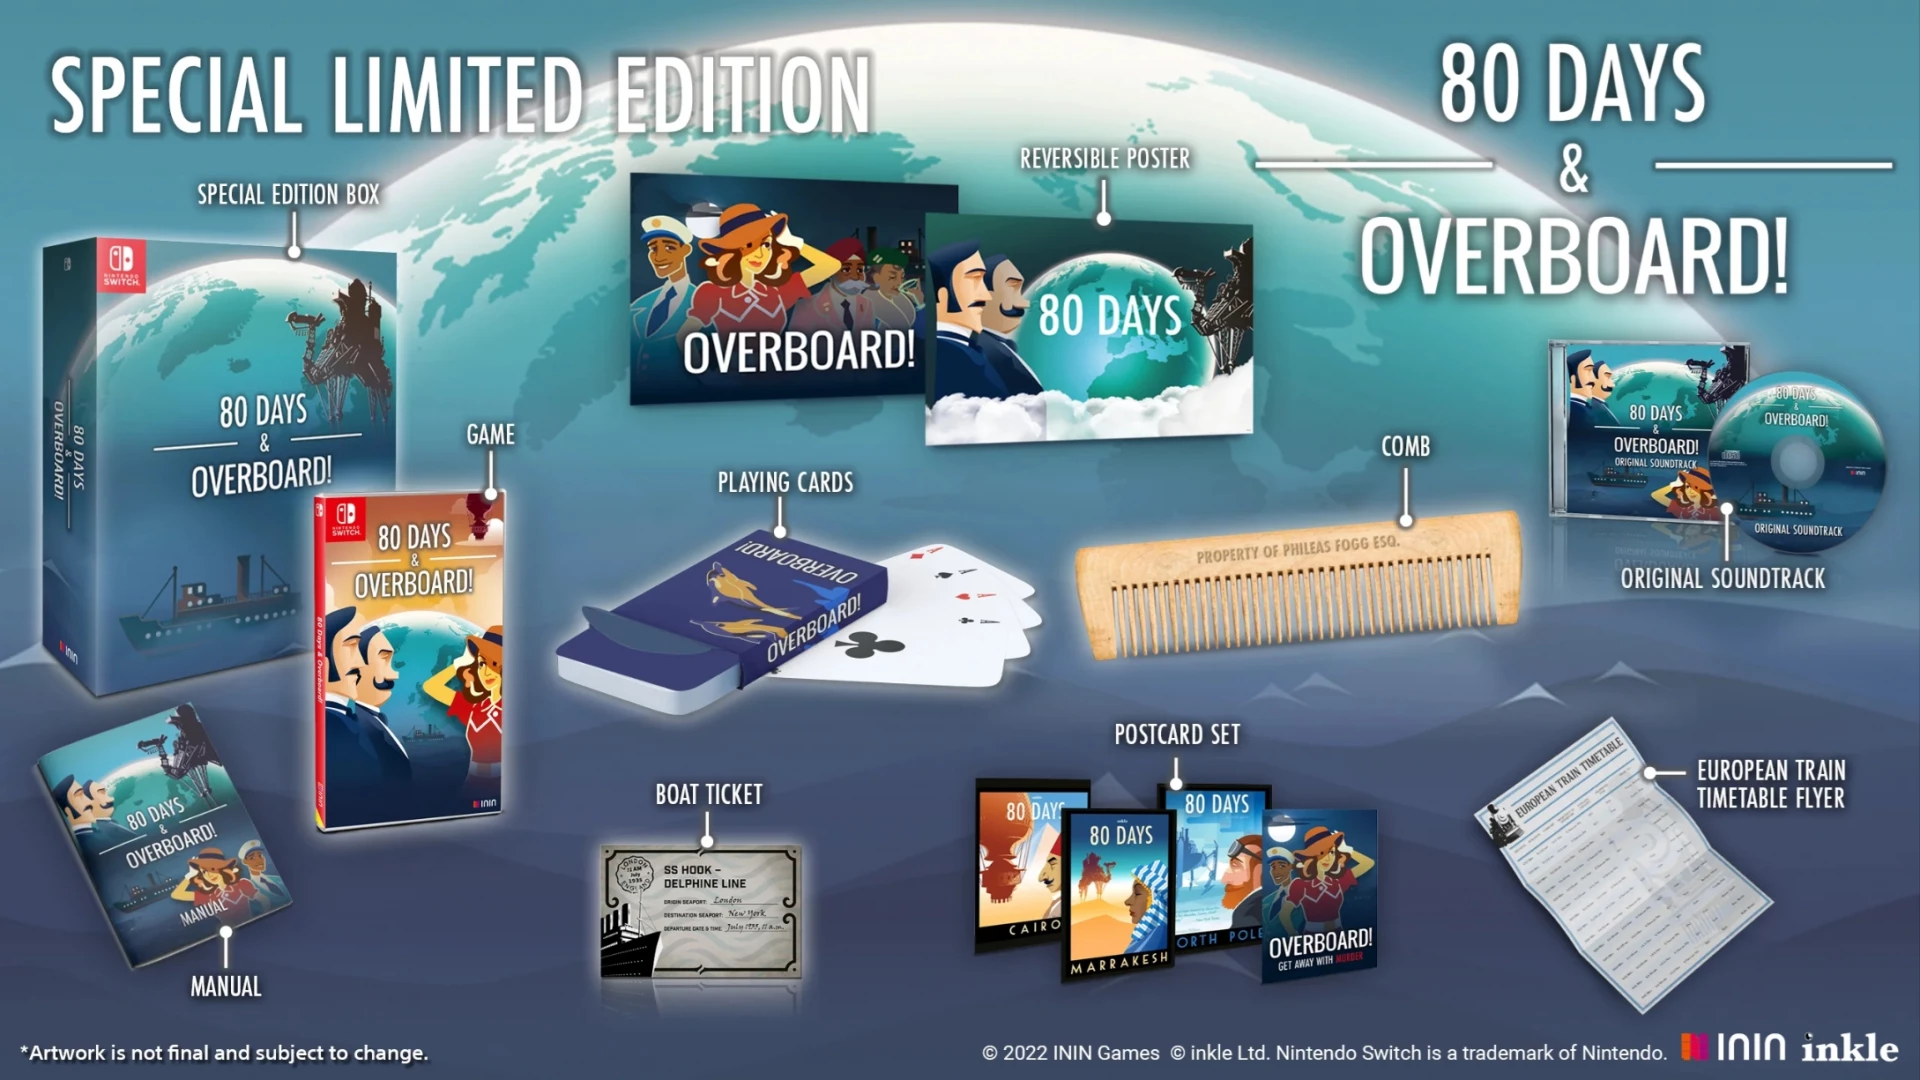 80 Days & Overboard! - Special Limited Edition (Switch), ININ Games